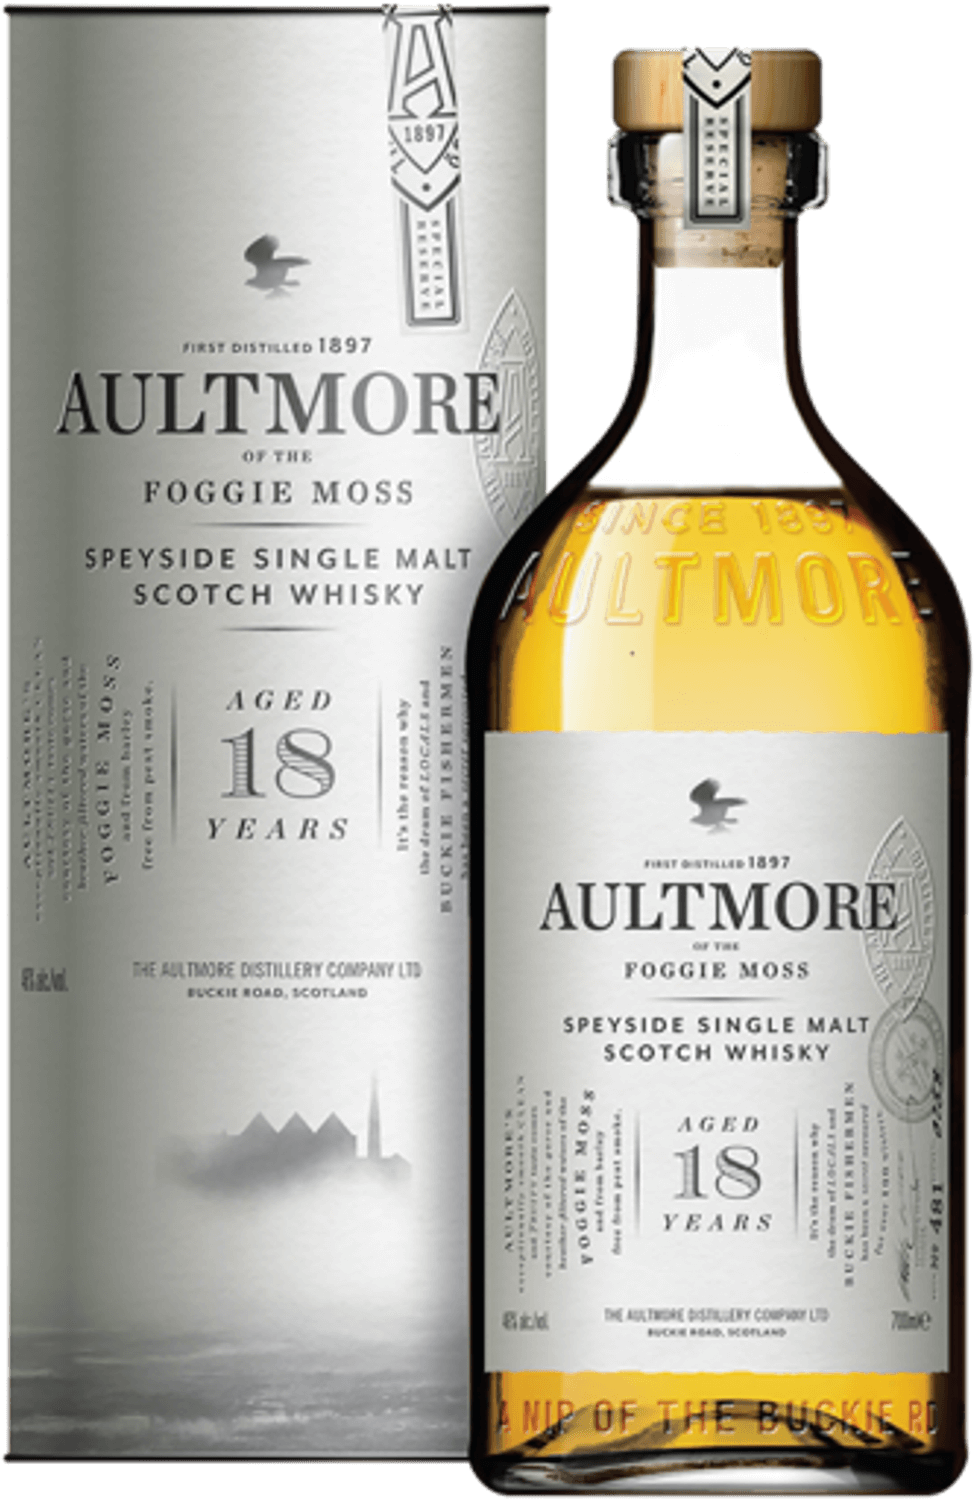 Aultmore 18 Years Old Speyside Single Malt Scotch Whisky (gift box) glen turner 12 years old single malt scotch whisky gift box